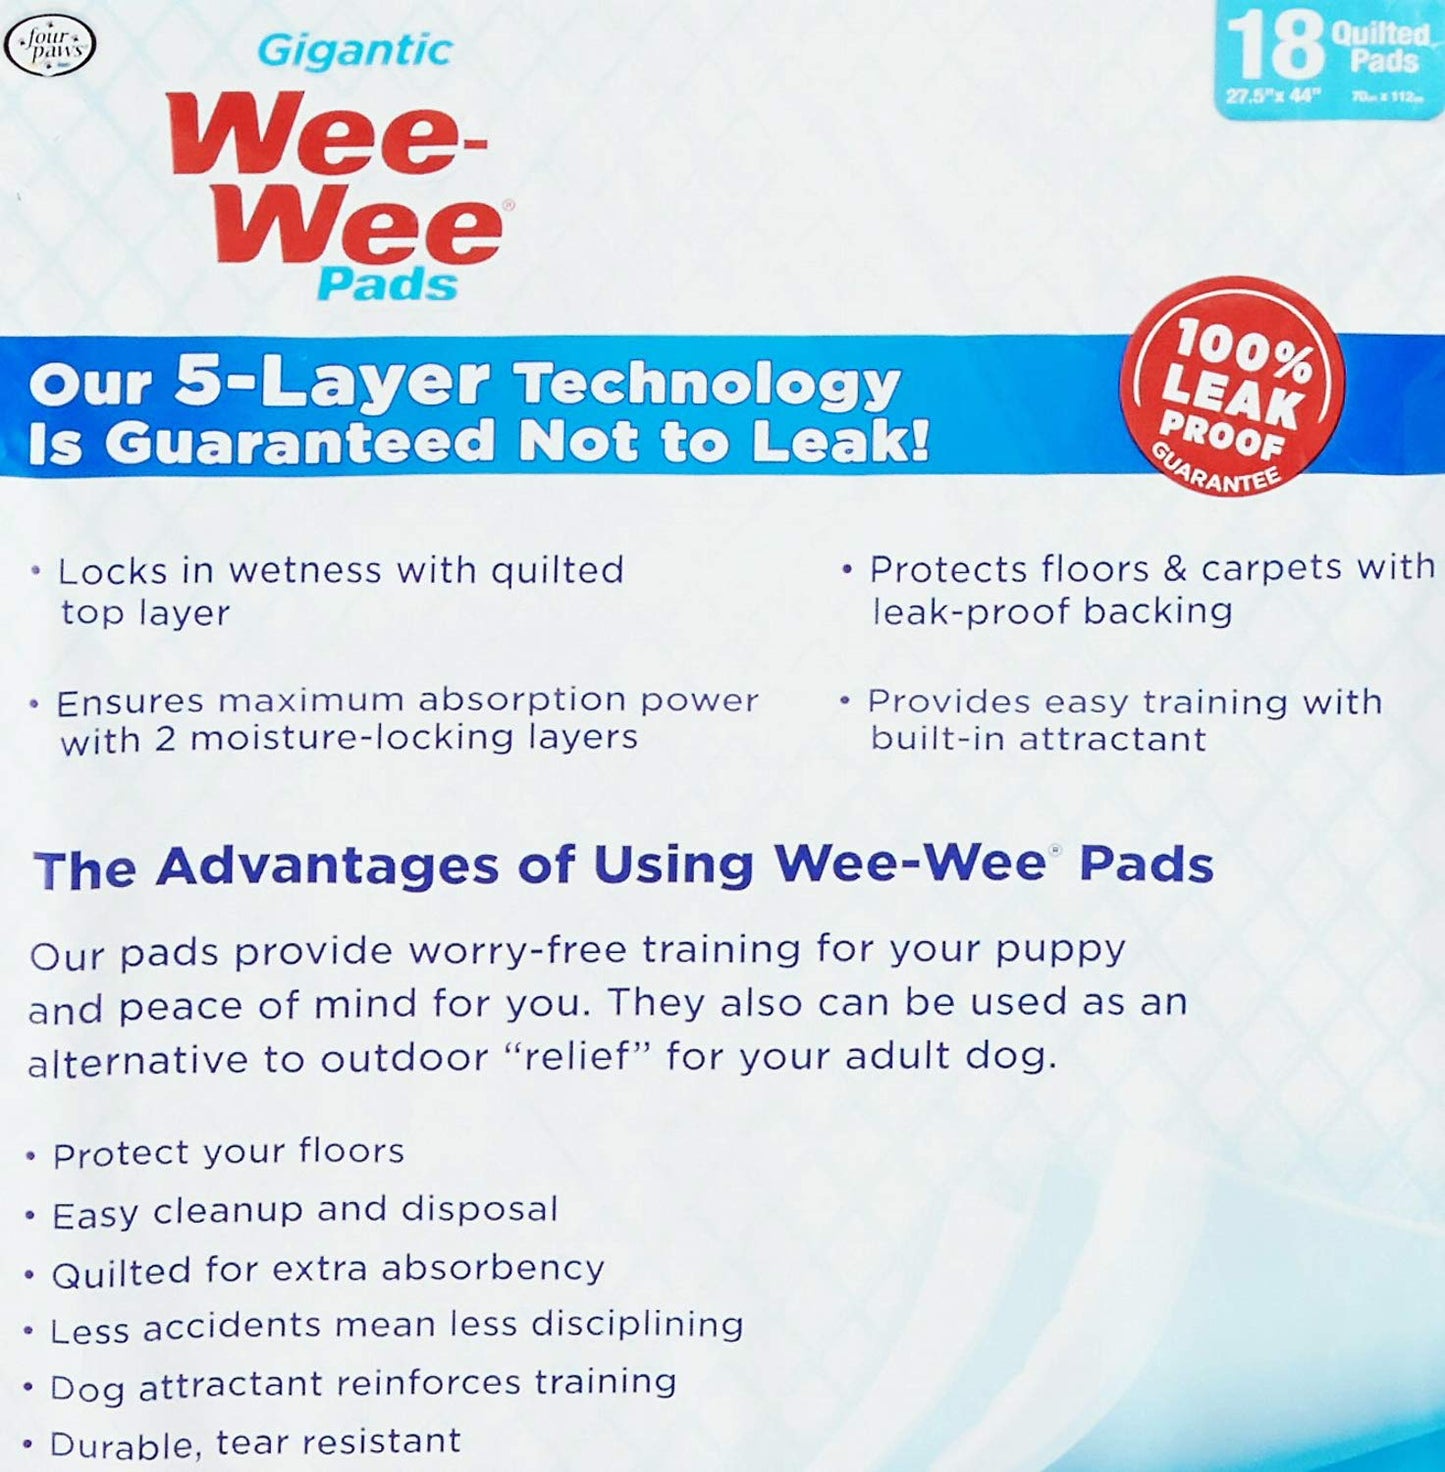 Four Paws Wee-Wee Pads, Gigantic, 18 per Pack (4 Packs)